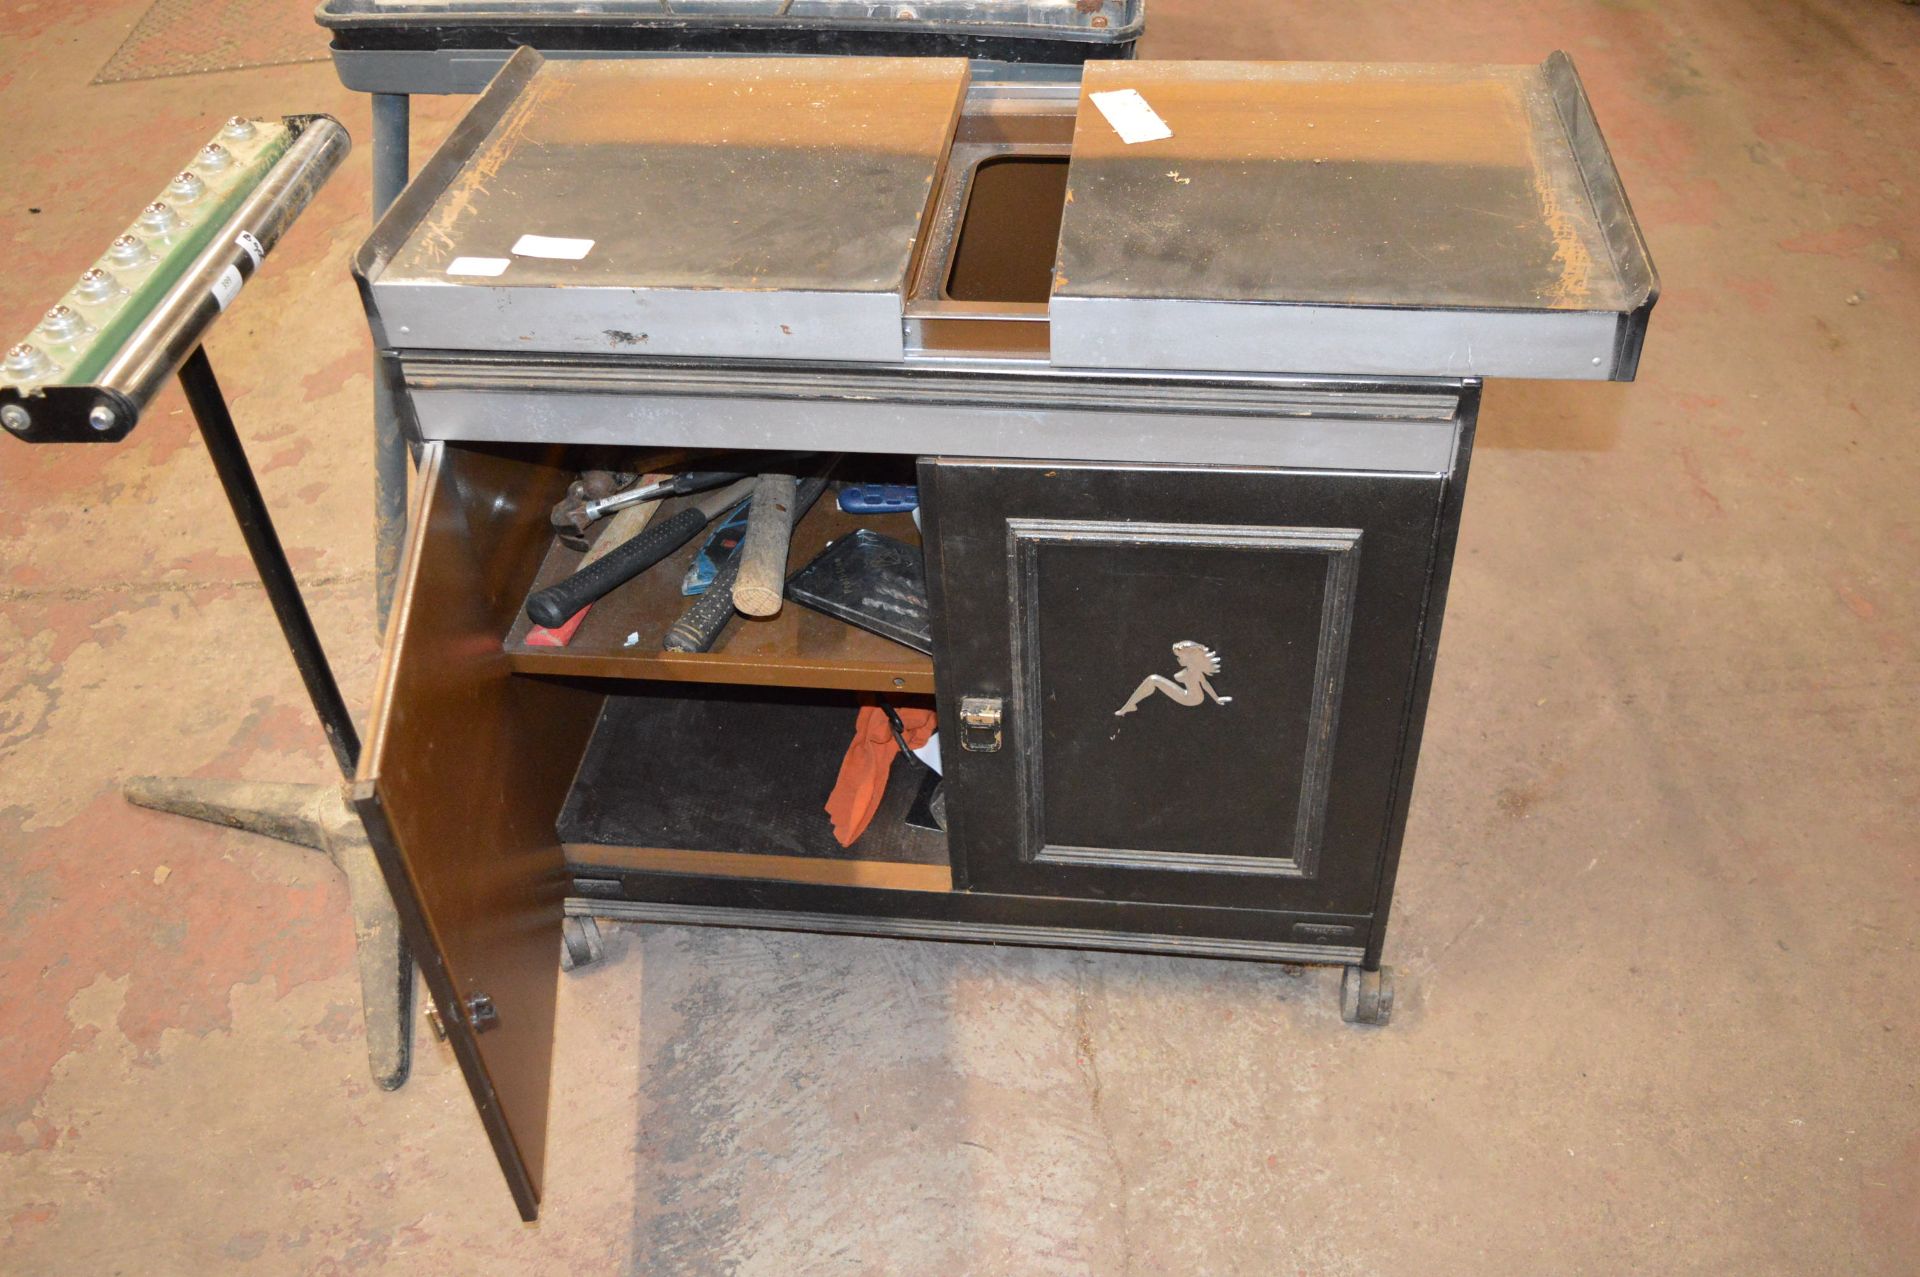 Quantity of Motorsport Toolboxes with contents, Converted Hostess Trolley with Contents of Tools - Image 10 of 11